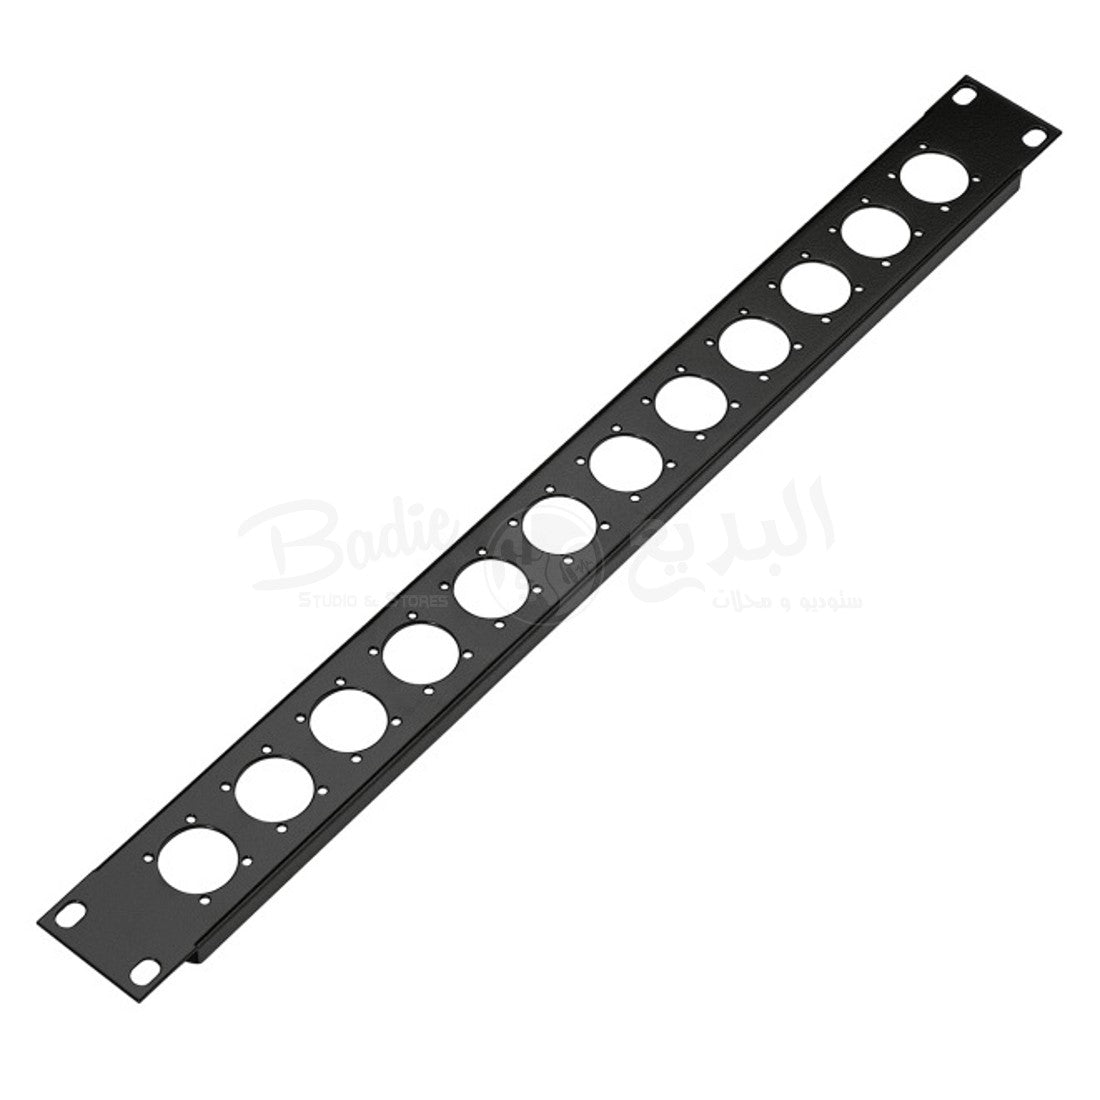 Konig & Meyer 28312-000-55 Rack Panel For 12 XLR Connector, 1-Space | Professional Audio Accessories | Musical Instruments. Musical Instruments: Accessories By Categories, Professional Audio Accessories, Professional Audio Accessories. Professional Audio Accessories: Cables & Connectors By Categories, Professional Audio Accessories. Professional Audio Accessories: Panels & Chassis Connectors | Konig &amp; Meyer